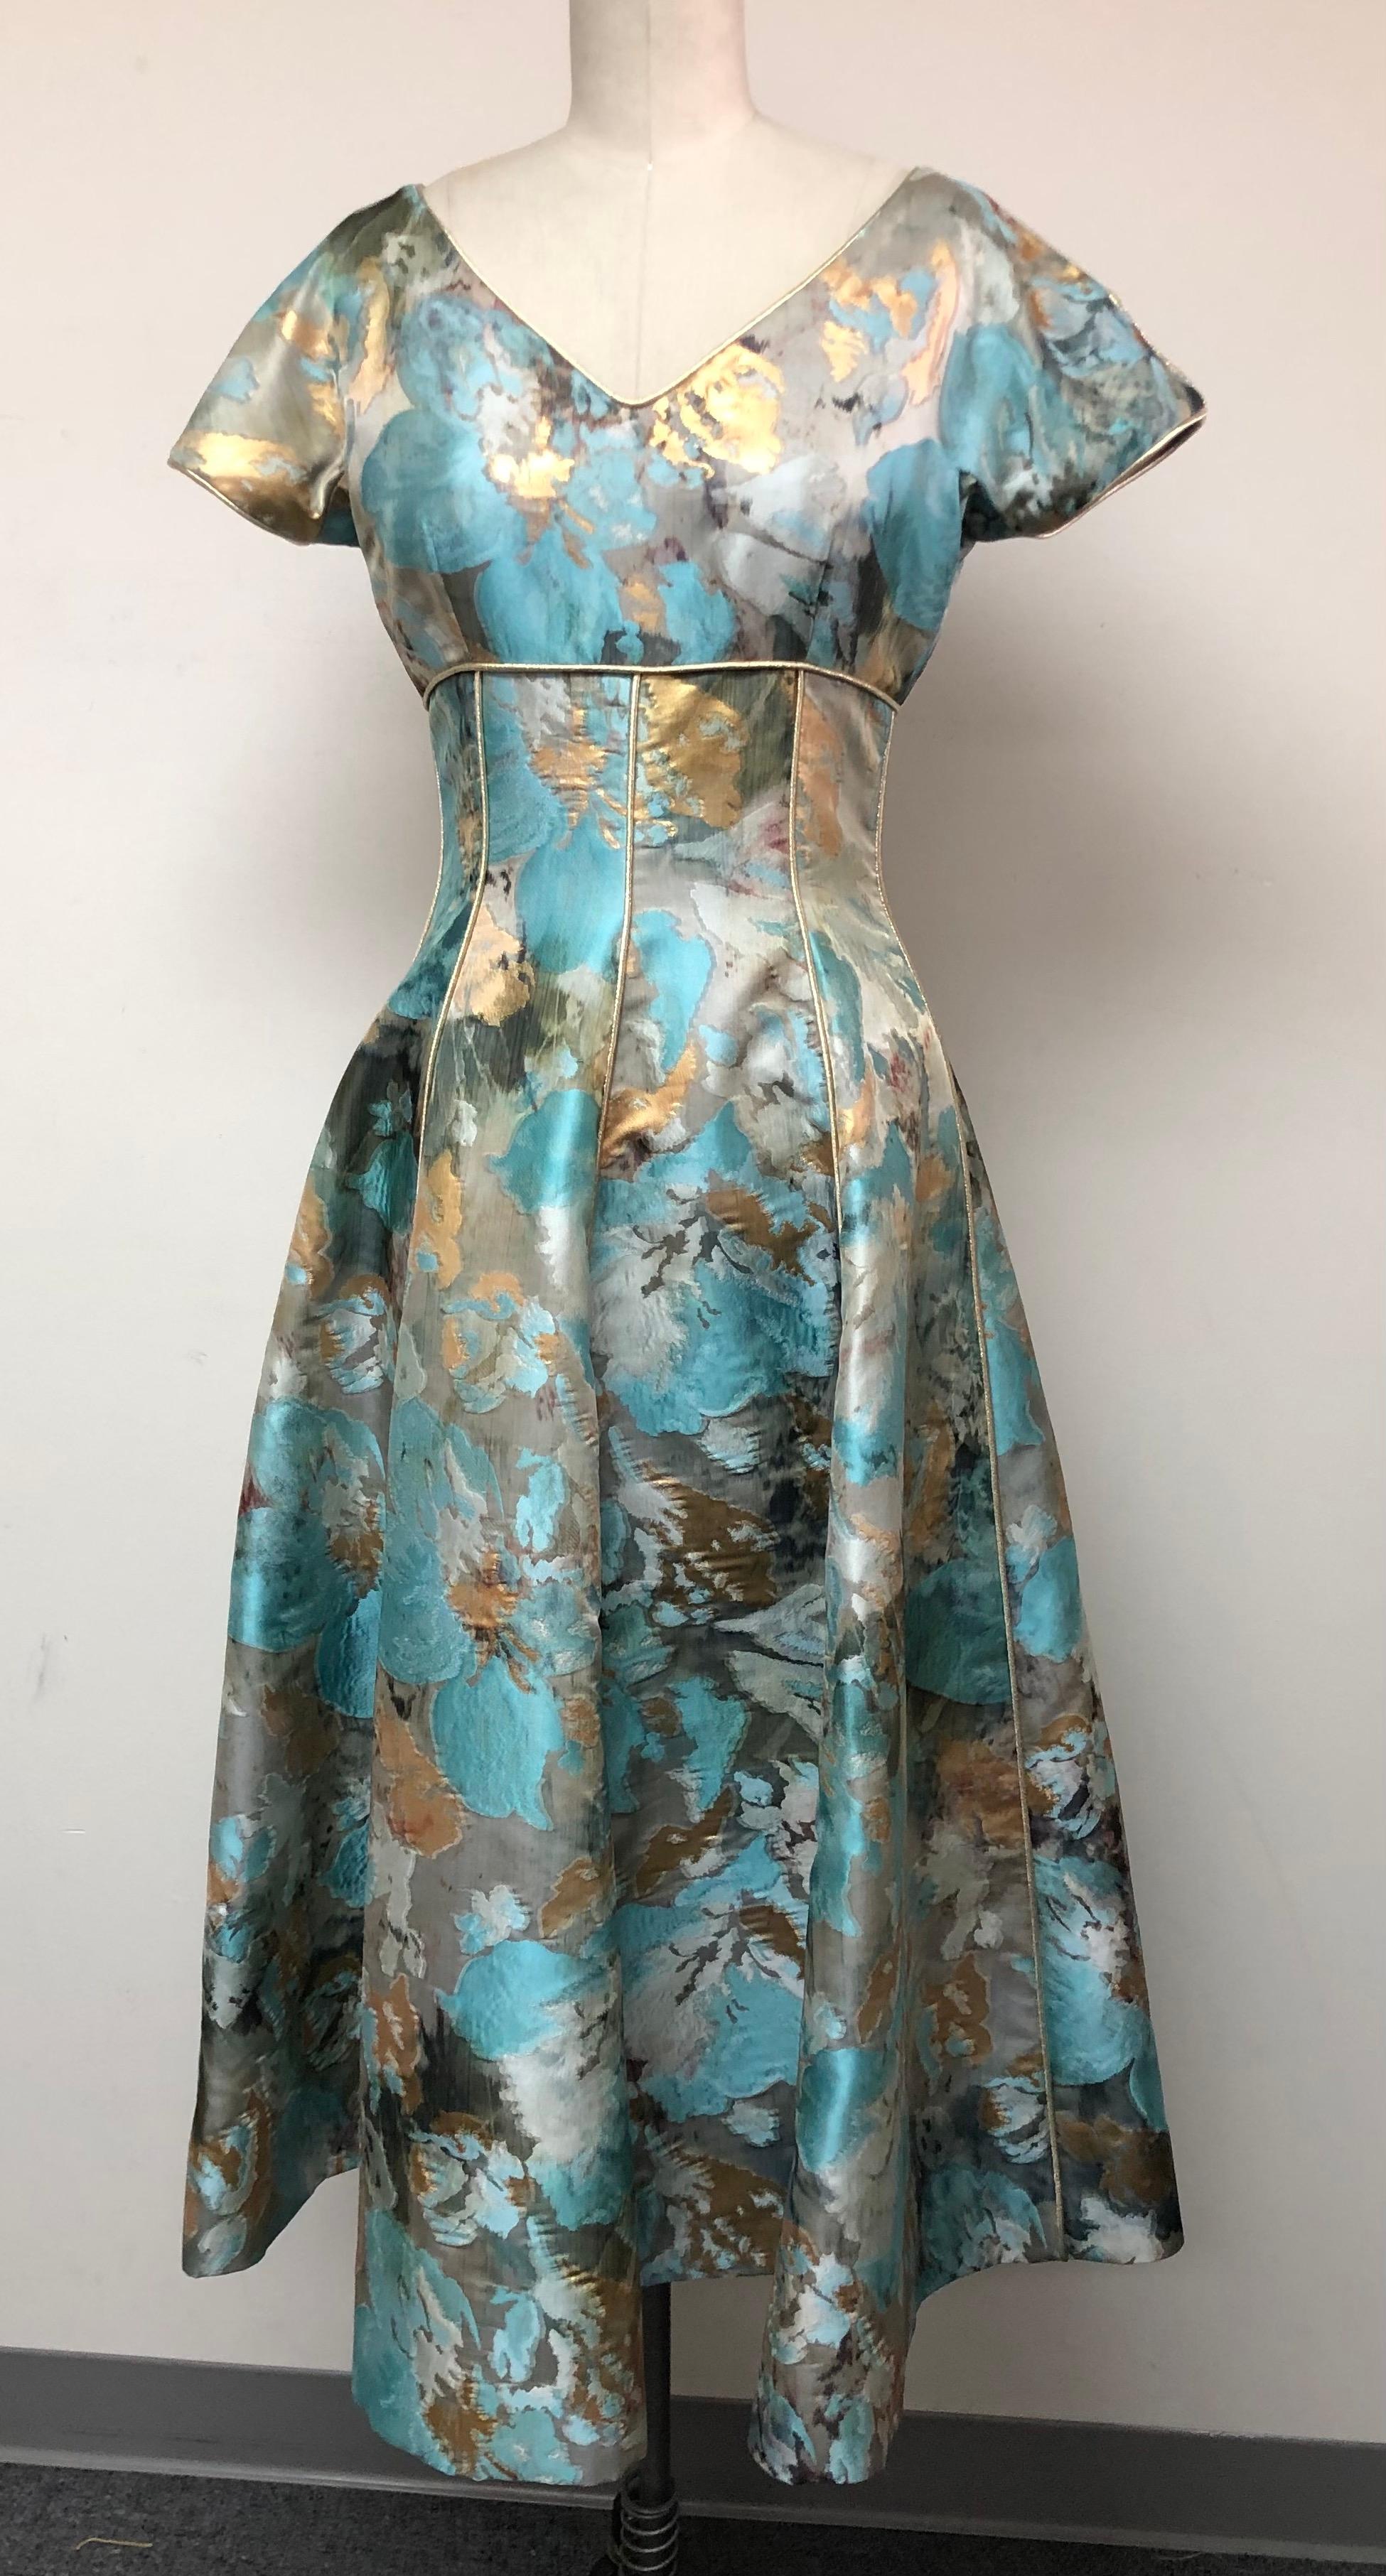 V Neck Fit and Flare Dress in Abstract French Taffeta -Turquoise Black and Gold.  
Piped in Gold throughout for shimmery delight.
The skirt has a lovely fullness adding to its glamour. Great for dancing and making an eye turning entrance. Cocktail